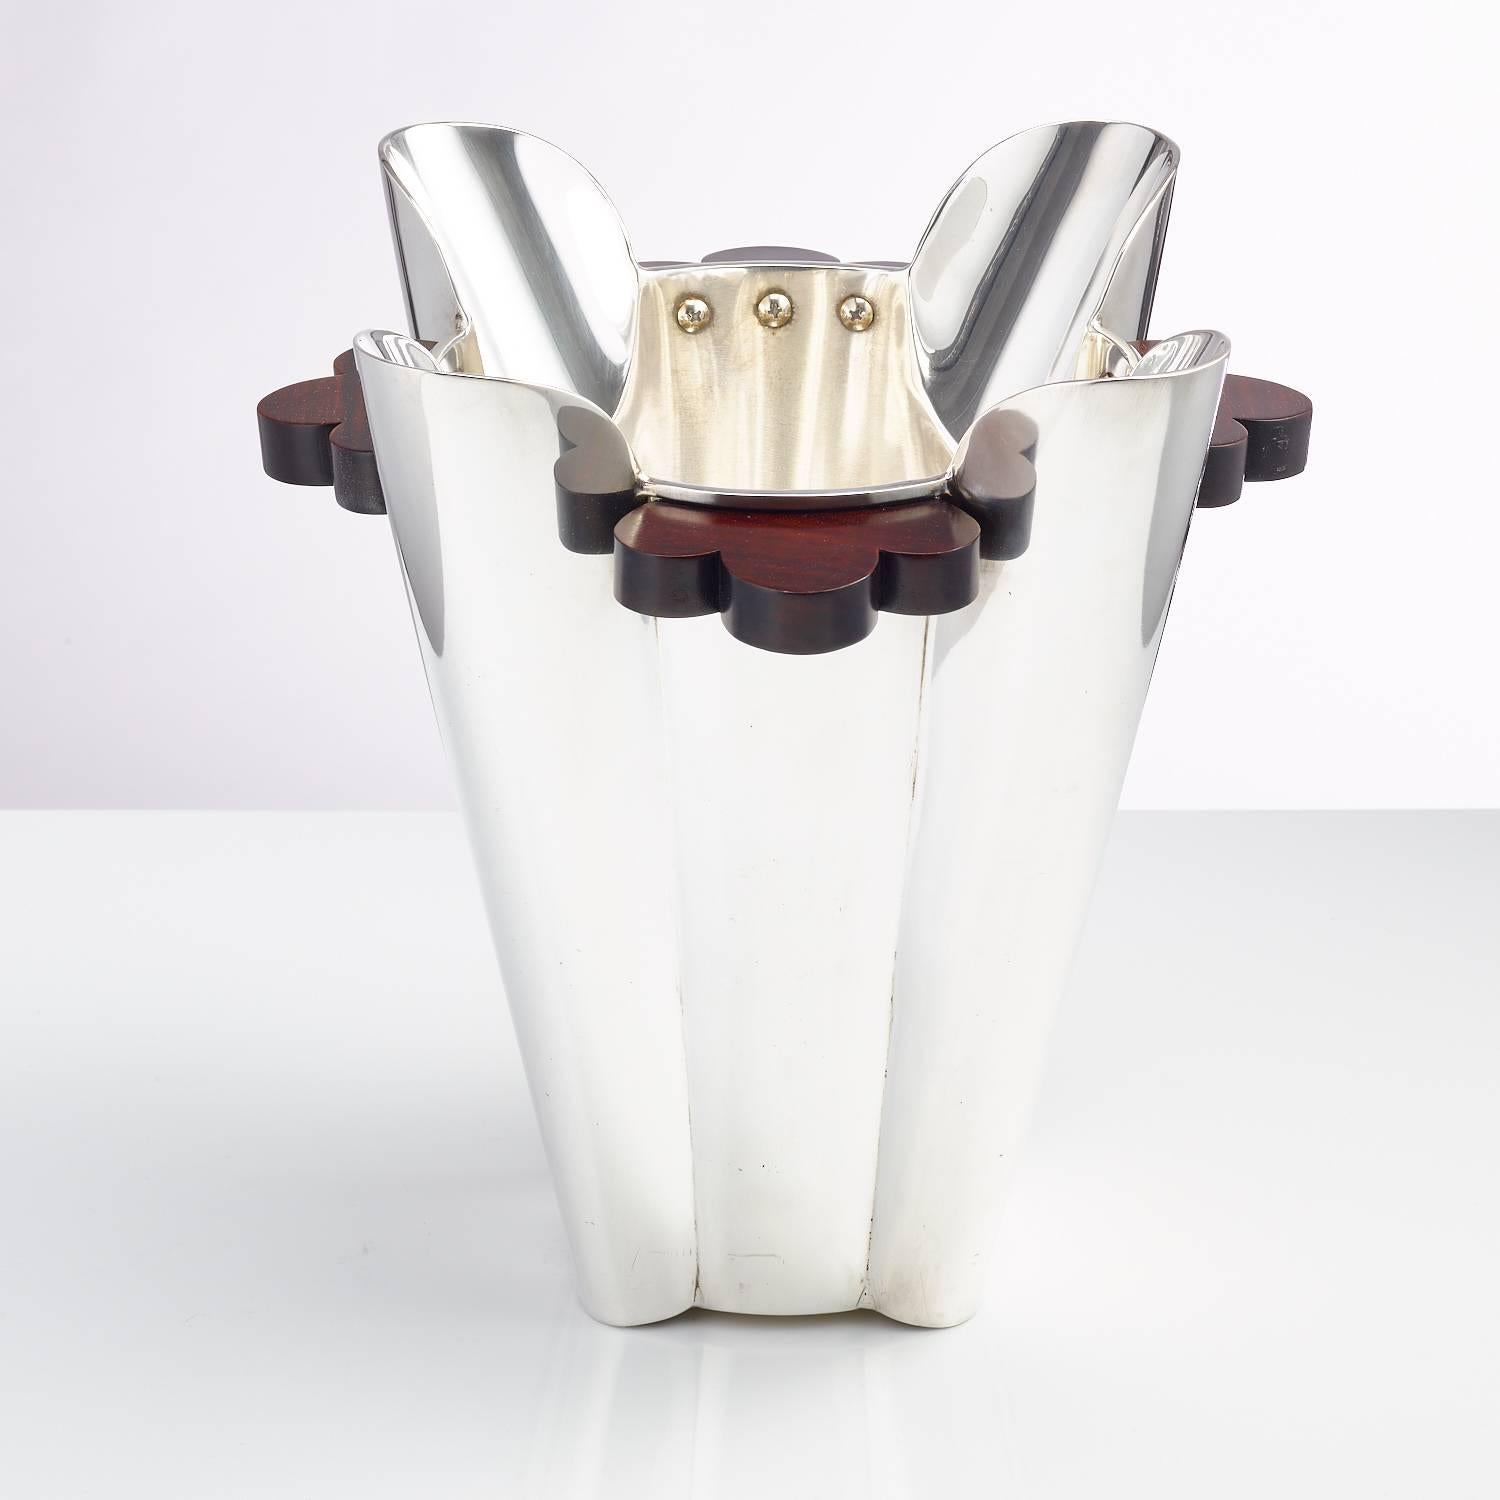 A 20th century Art Deco silver plated champagne cooler or ice bucket with Macassar hardwood handles Italian, circa 1930
The robust heavy body has great form and is enhanced by the heavy duty rivets on the interior inner rim, this piece has also been